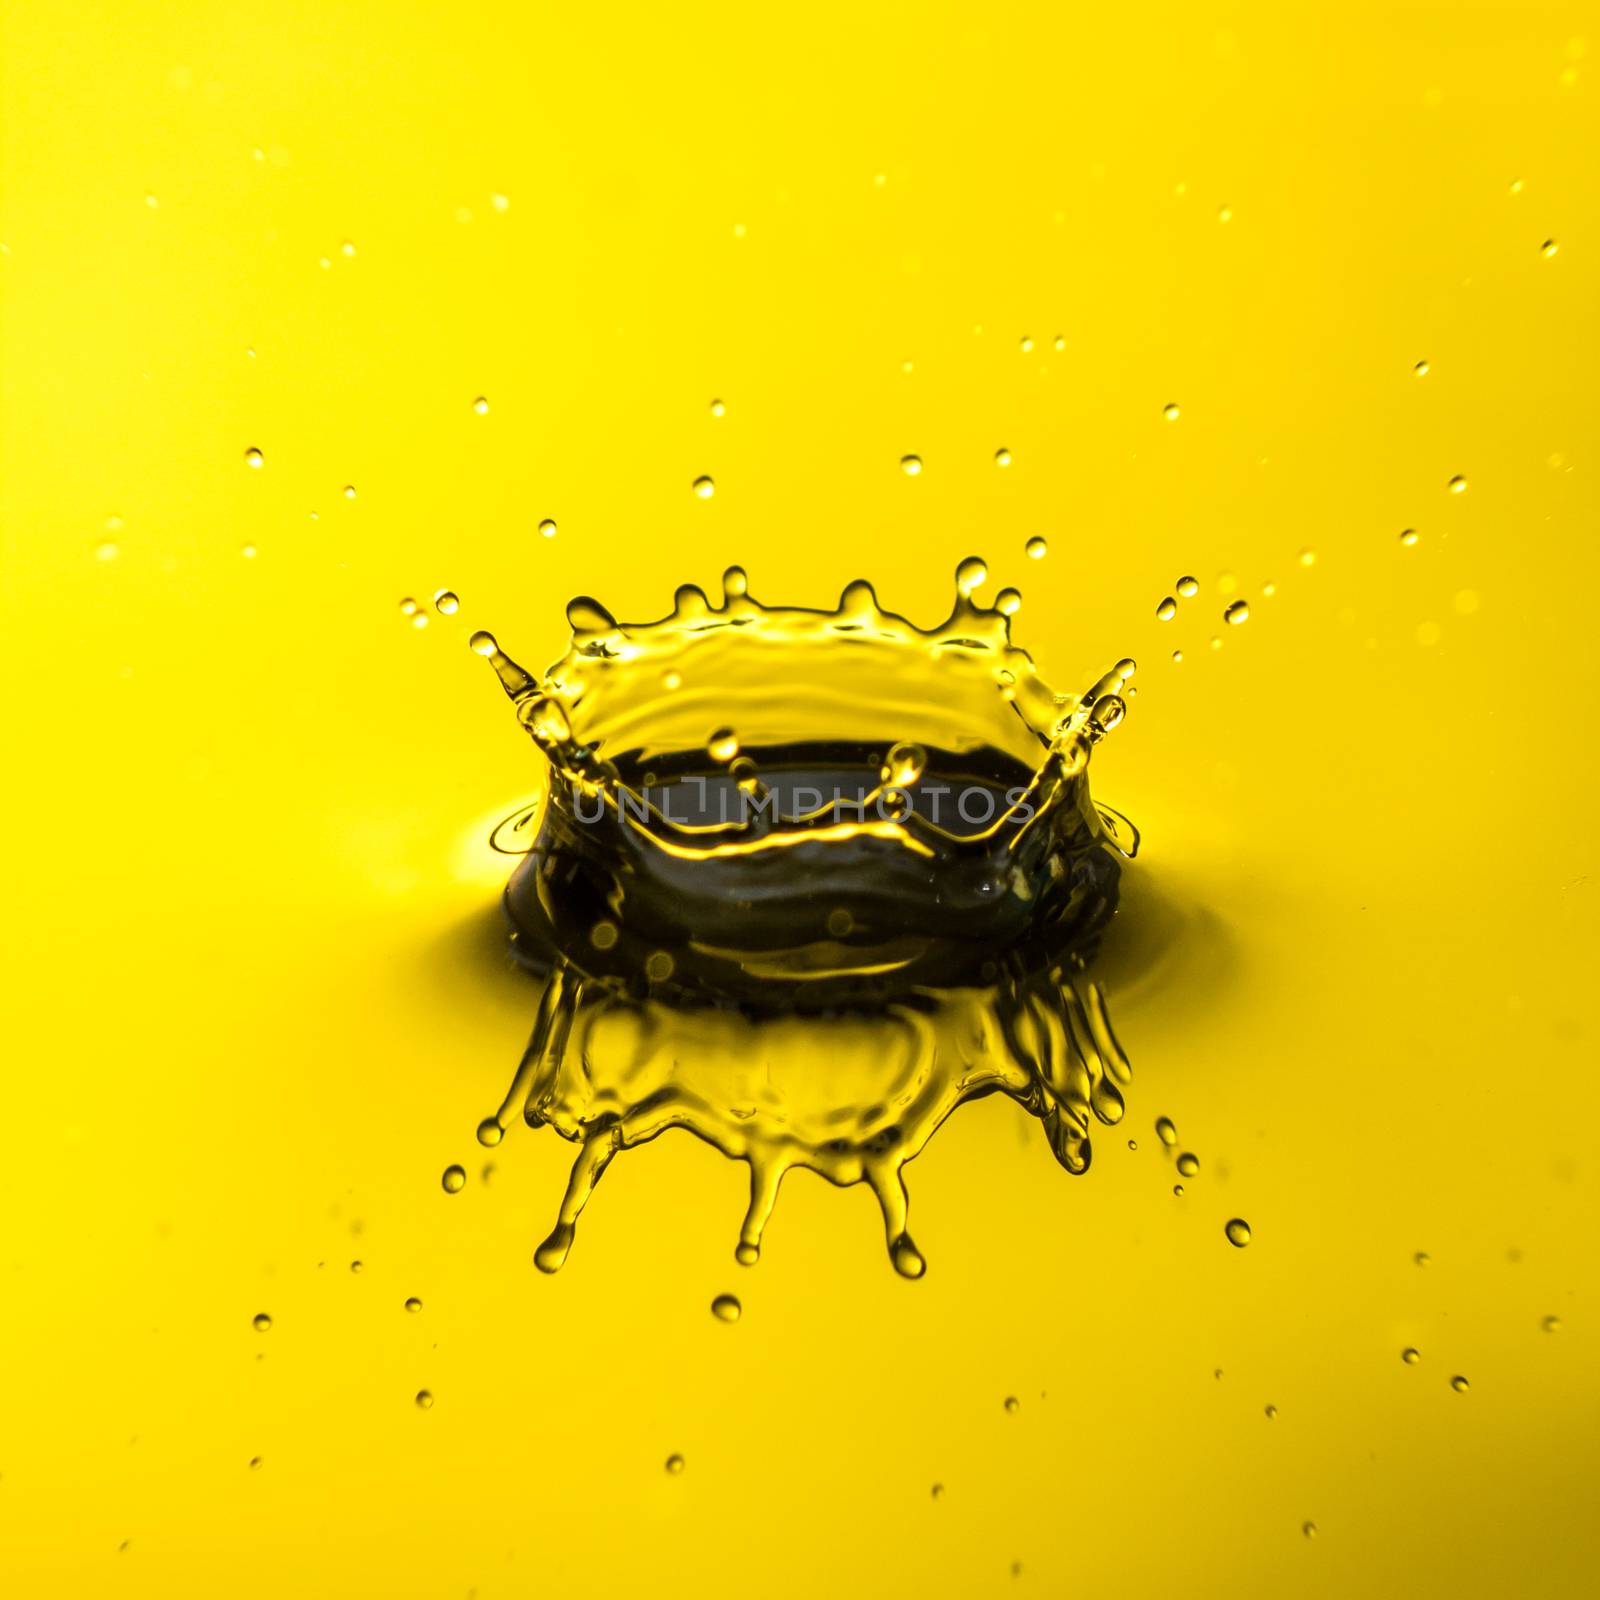 Close up of water droplet or splash-Image, yellow backgroung by petrsvoboda91